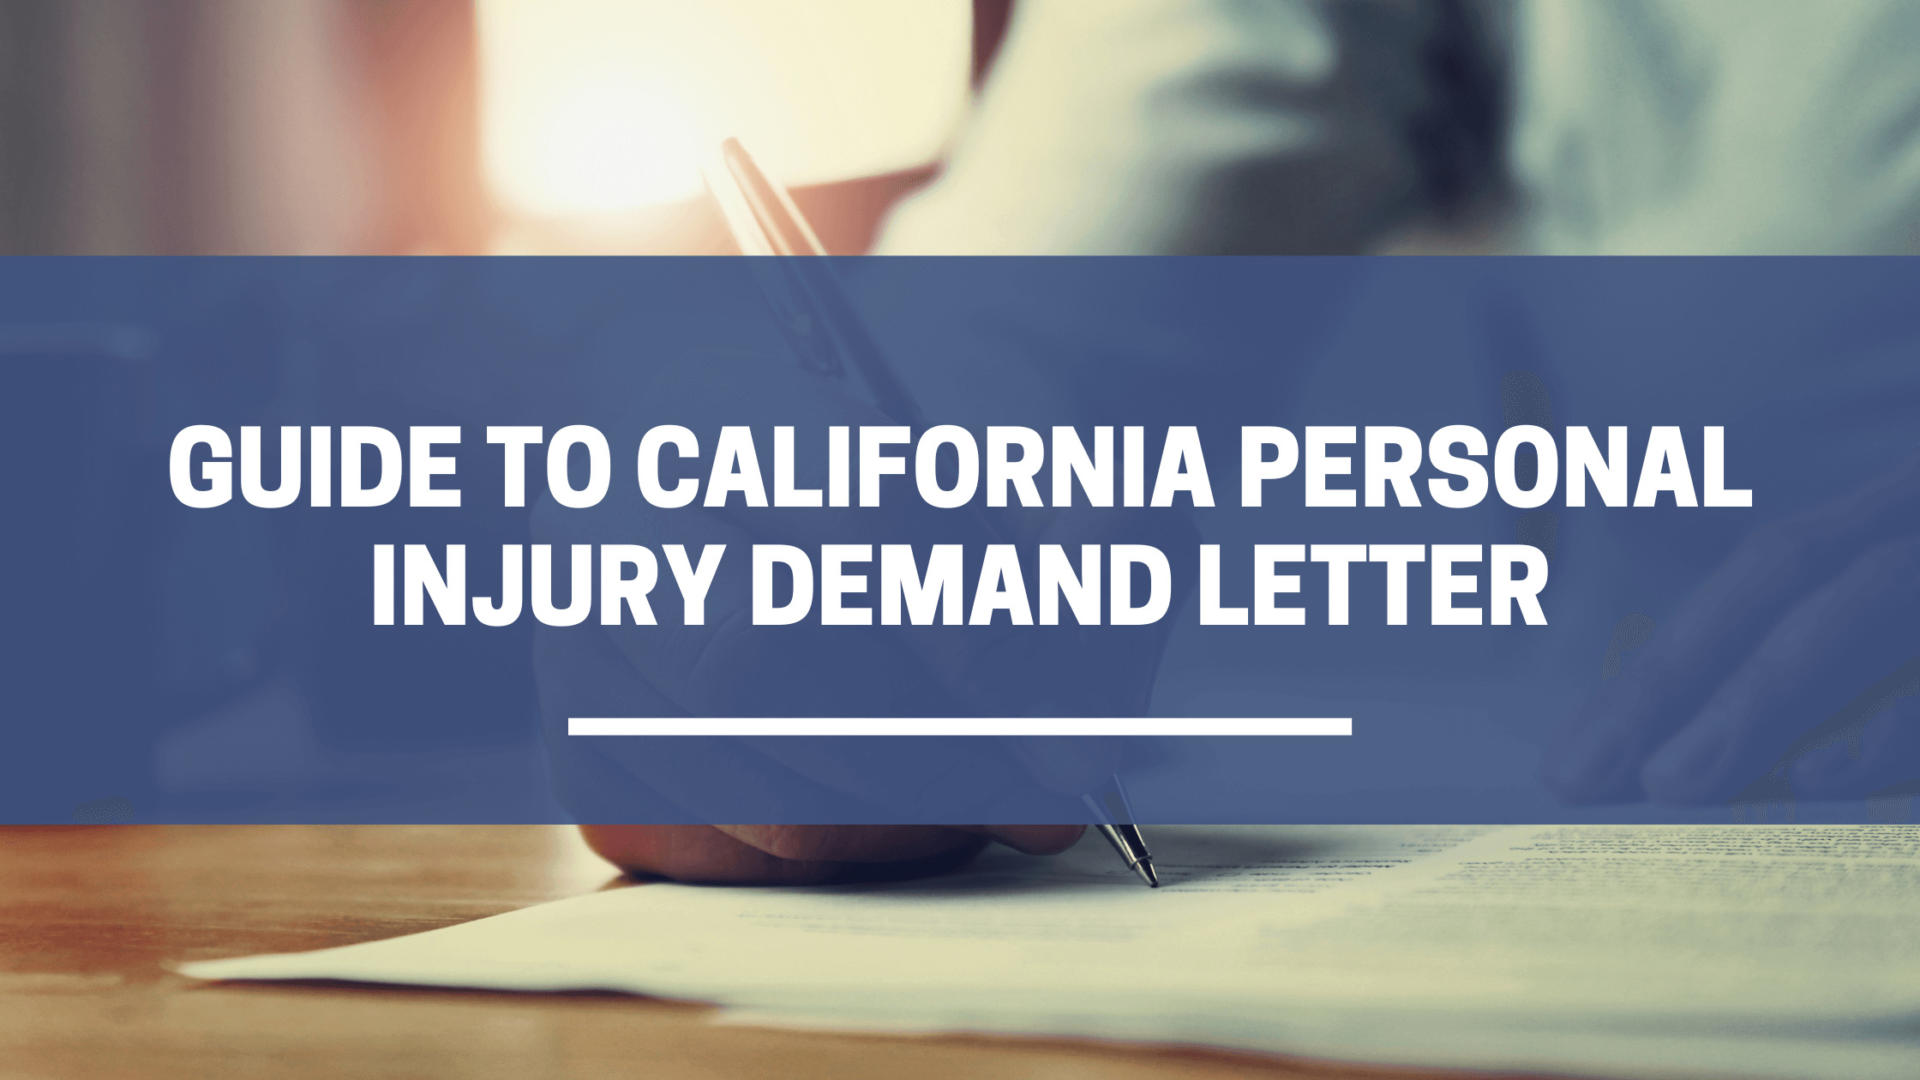 Guide to California personal injury demand letter